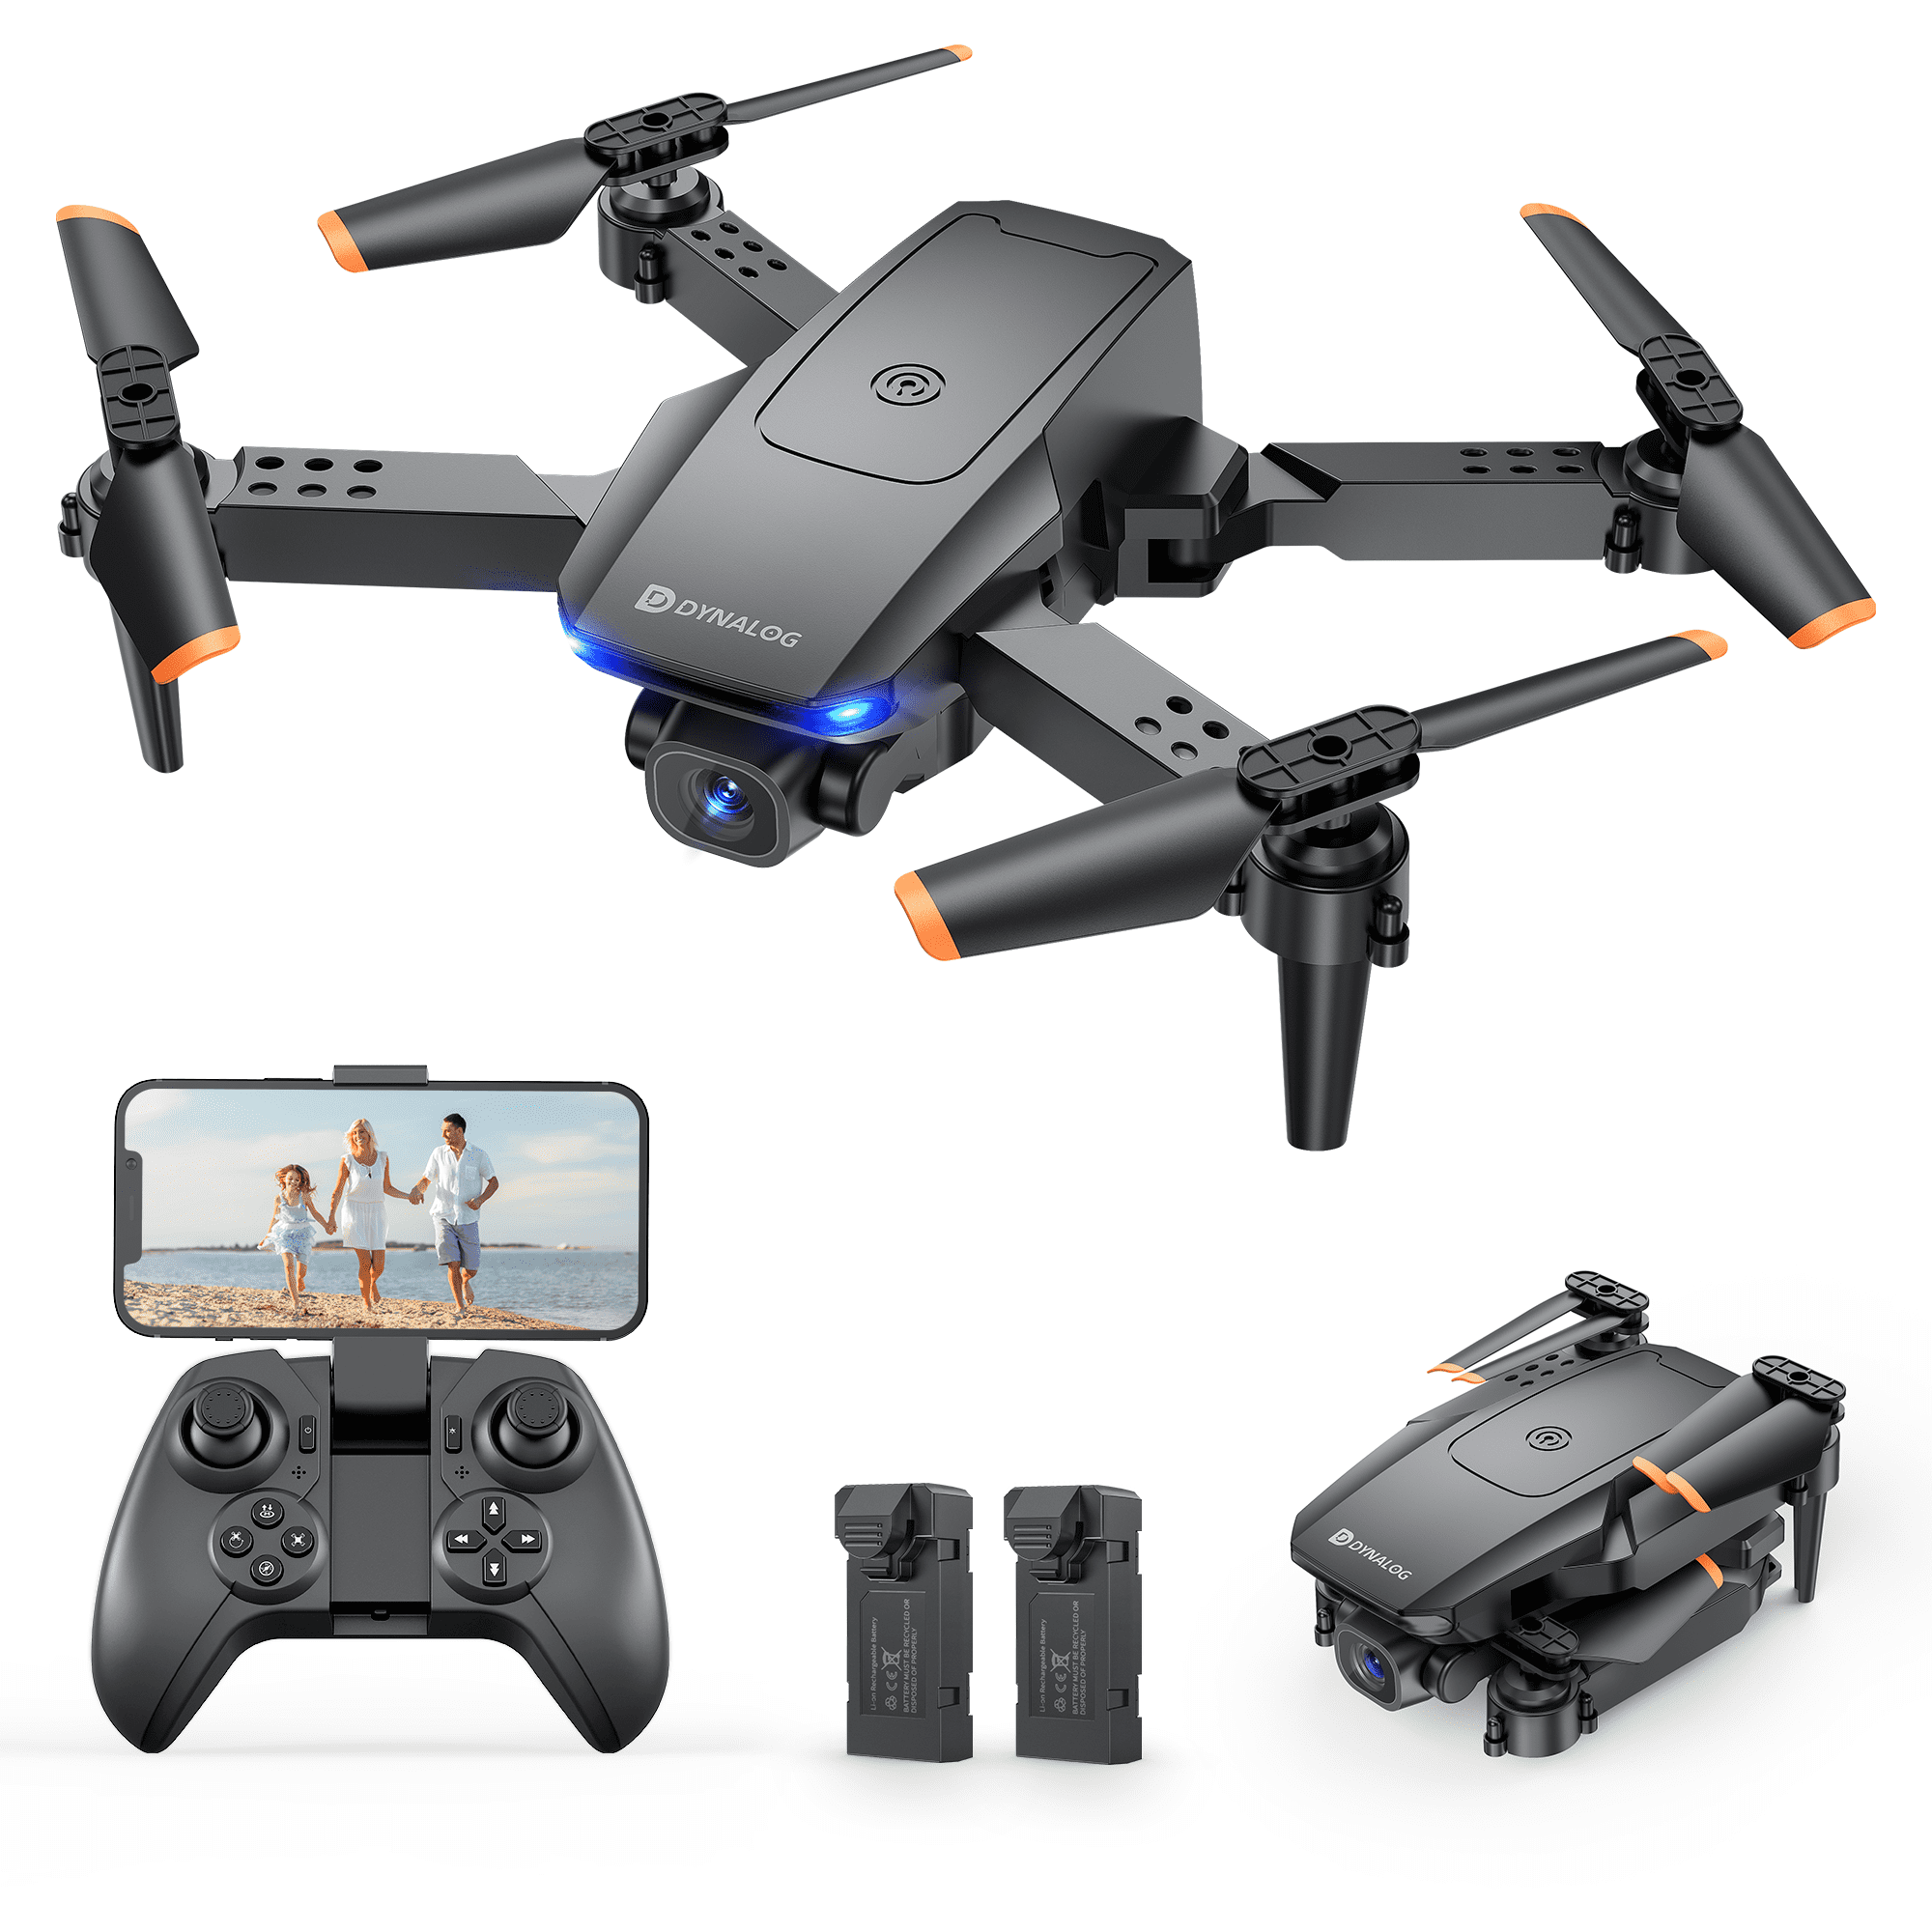 Tage en risiko Morse kode Anbefalede Dynalog DF100B Mini Drone RC Quadcopter with 1080P HD Camera, Foldable FPV  Drones WiFi Live Video for Beginners 8 Years & up, Black - Walmart.com